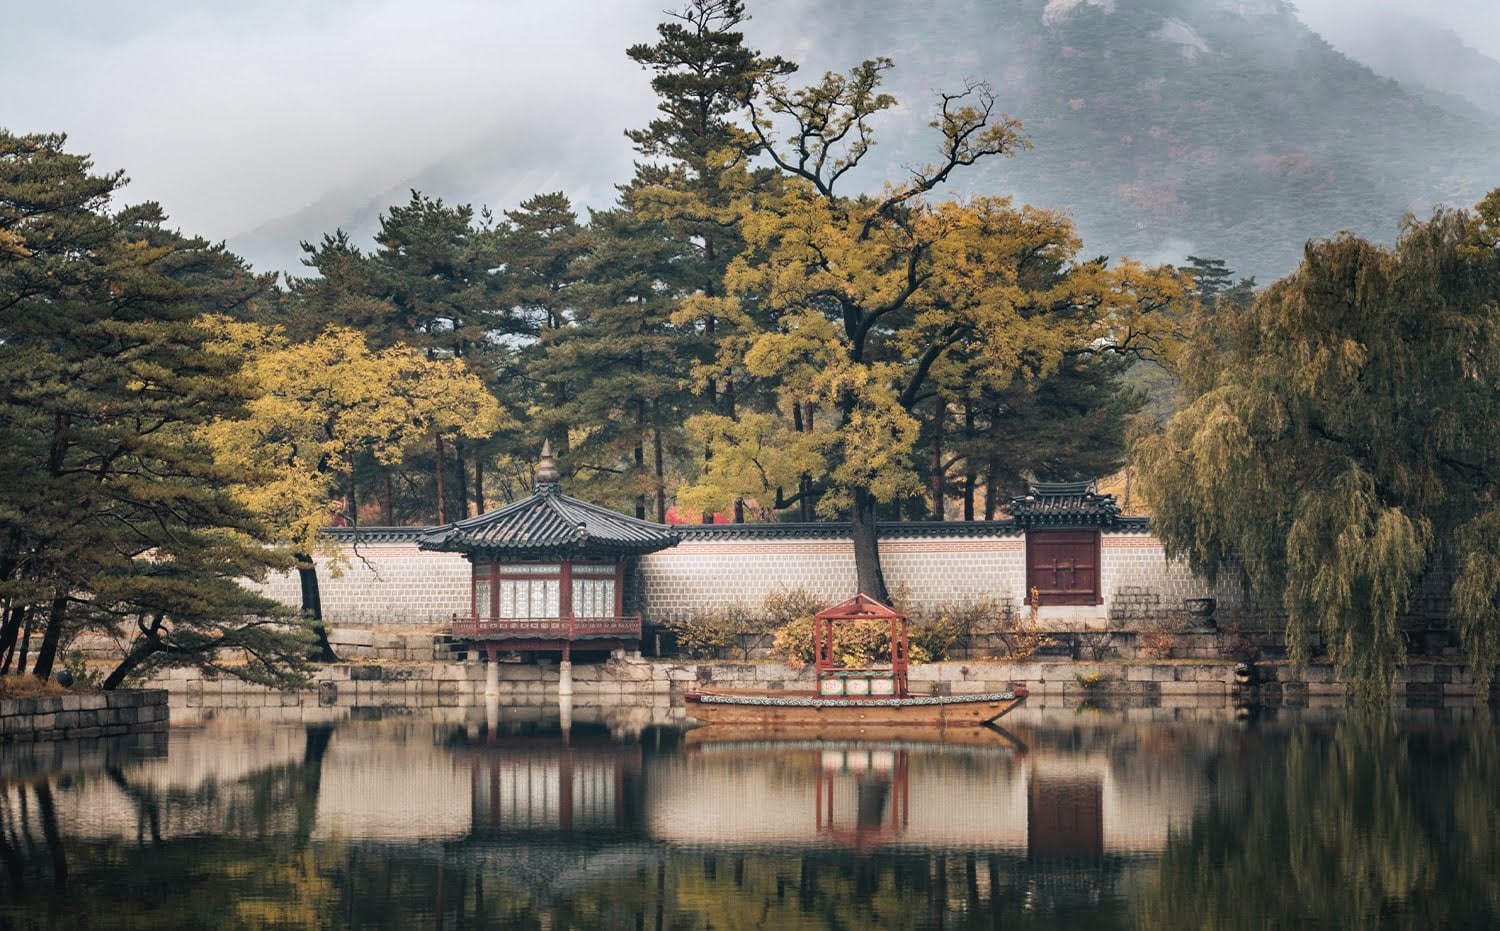 south korea tremendous Places to Visit in this Small Country